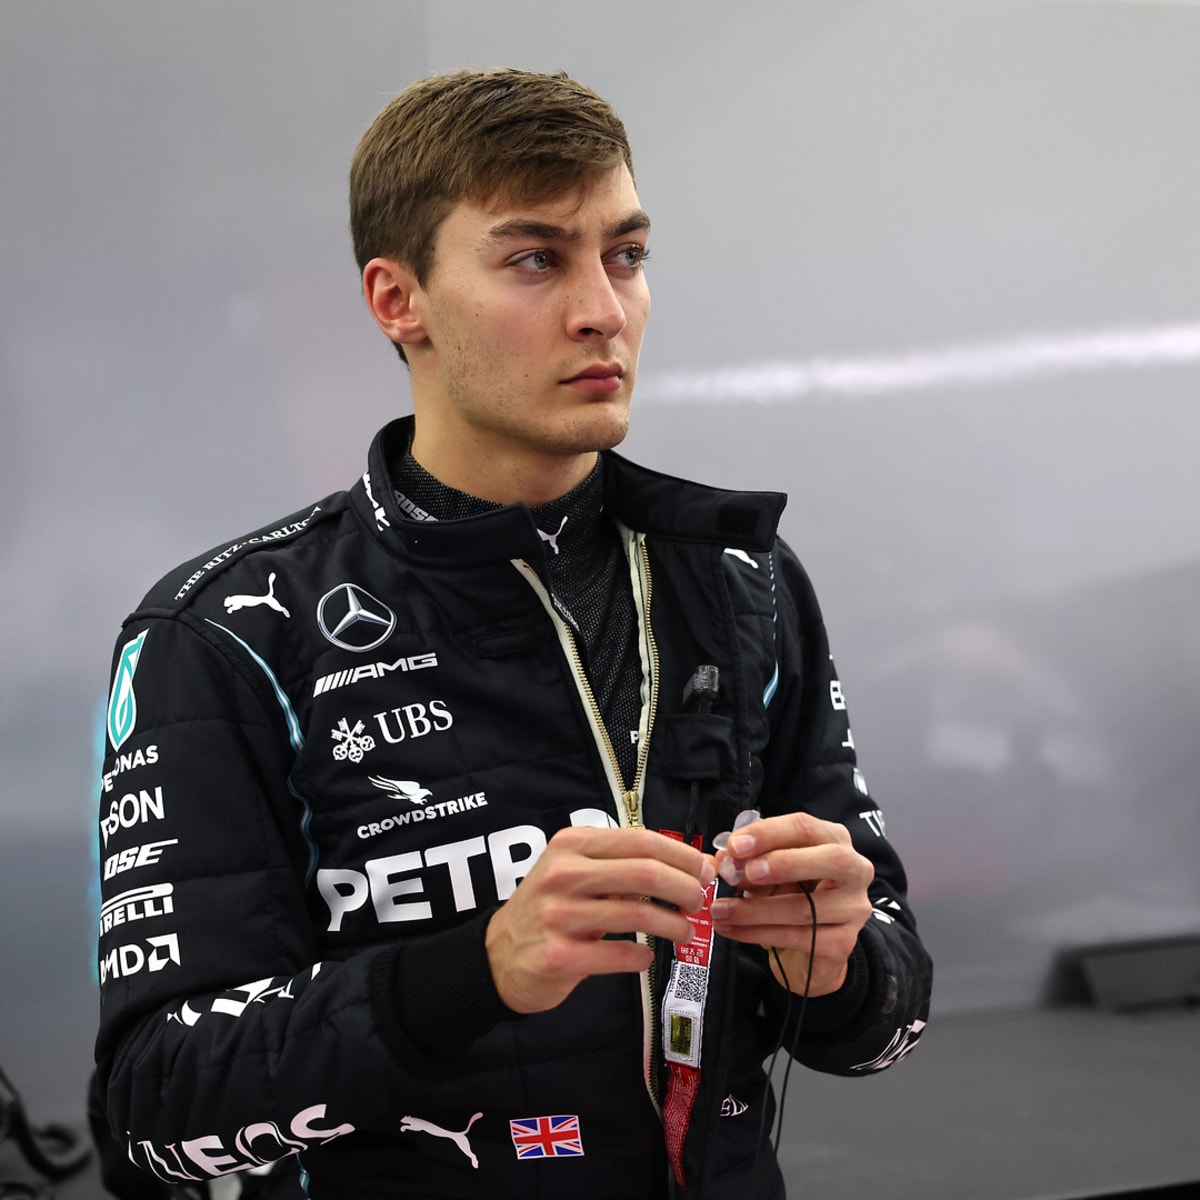 kuffert landsby alias F1 News: Mika Hakkinen Believes George Russell Can Stay Ahead Of Lewis  Hamilton - F1 Briefings: Formula 1 News, Rumors, Standings and More